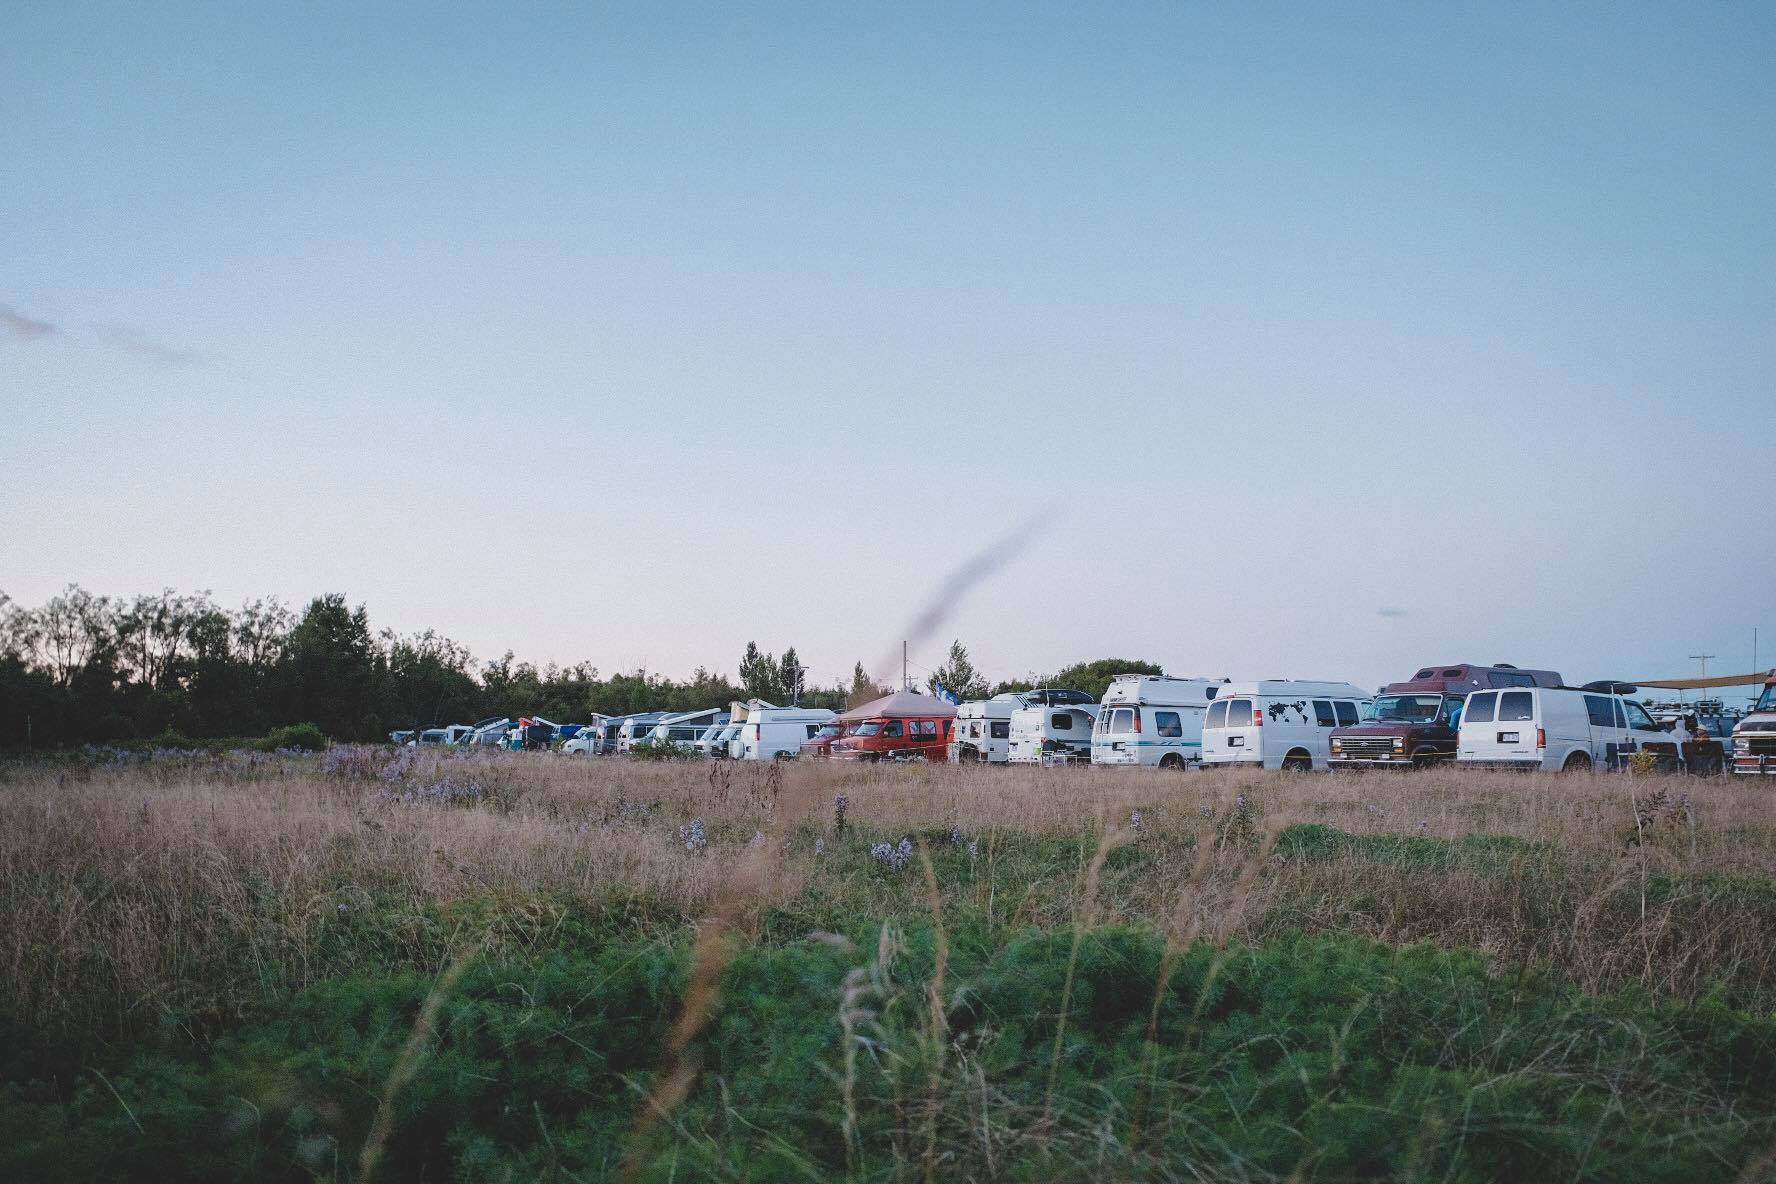 vans parked at isle-aux-coudres for van gathering